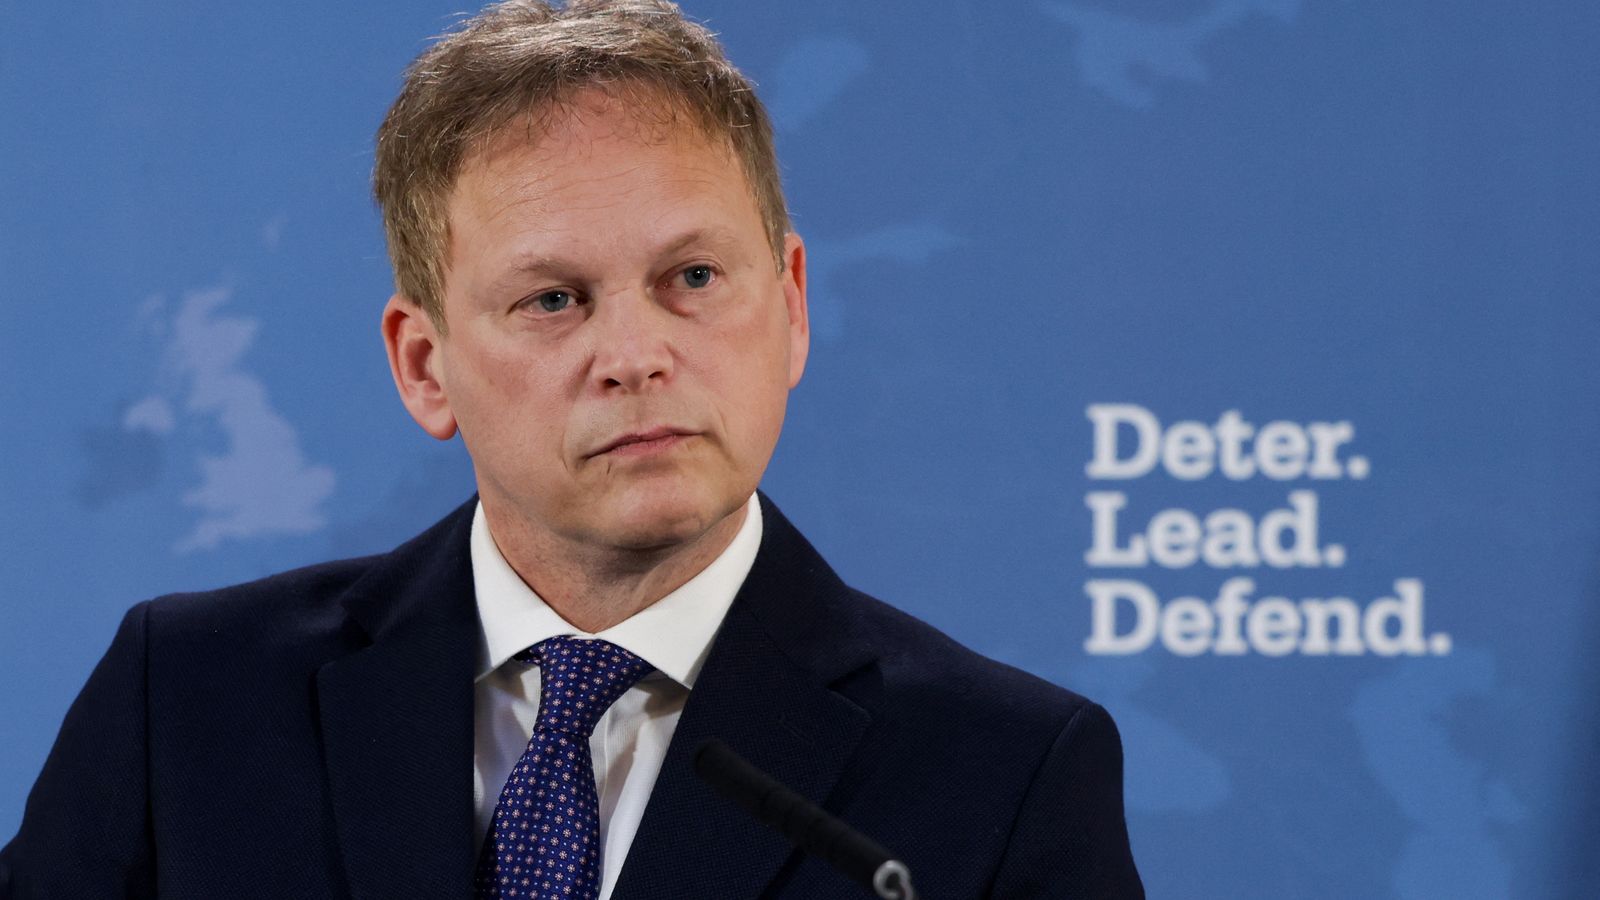 Grant Shapps accused of igniting 'weird culture war spat around wokery' over armed forces diversity plan 